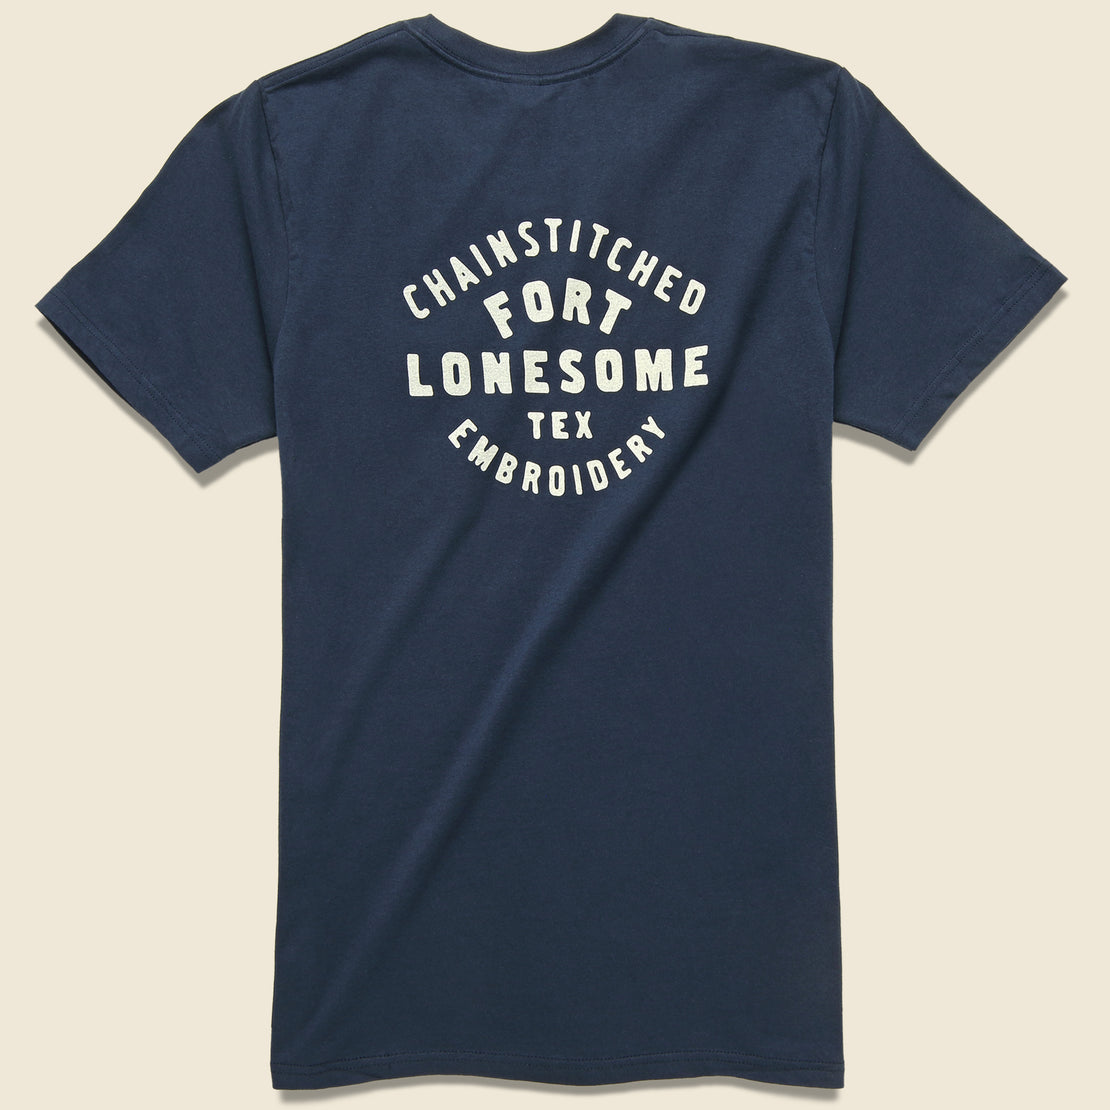 Logo Pocket Tee - Navy - Fort Lonesome - STAG Provisions - Tops - S/S Tee - Graphic